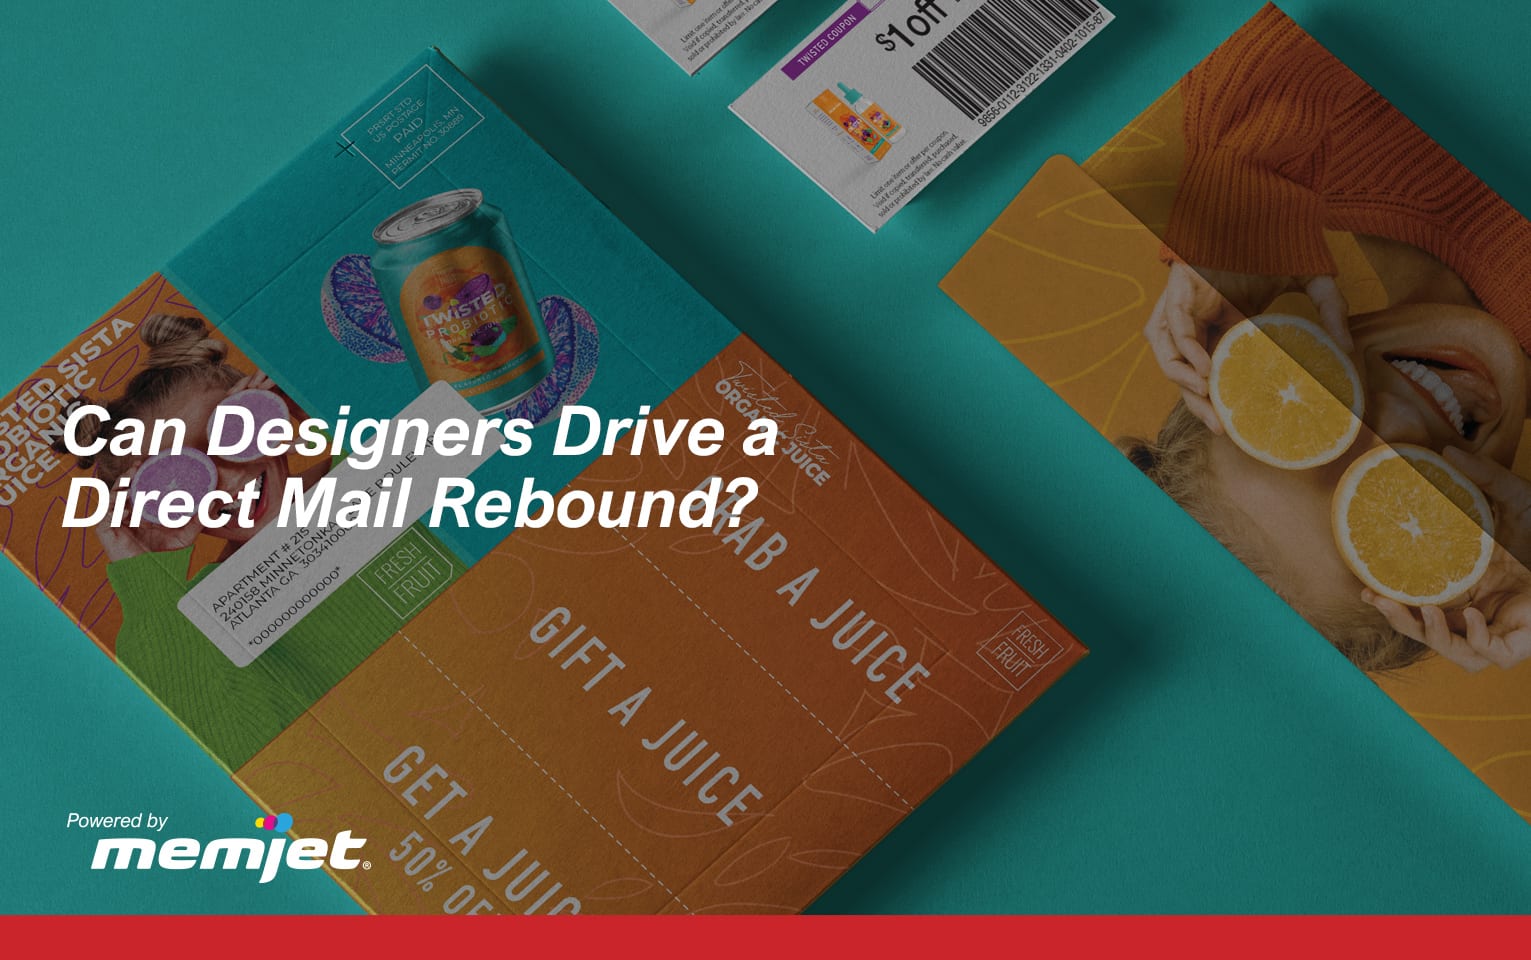 Can Designers Drive a Direct Mail Rebound?